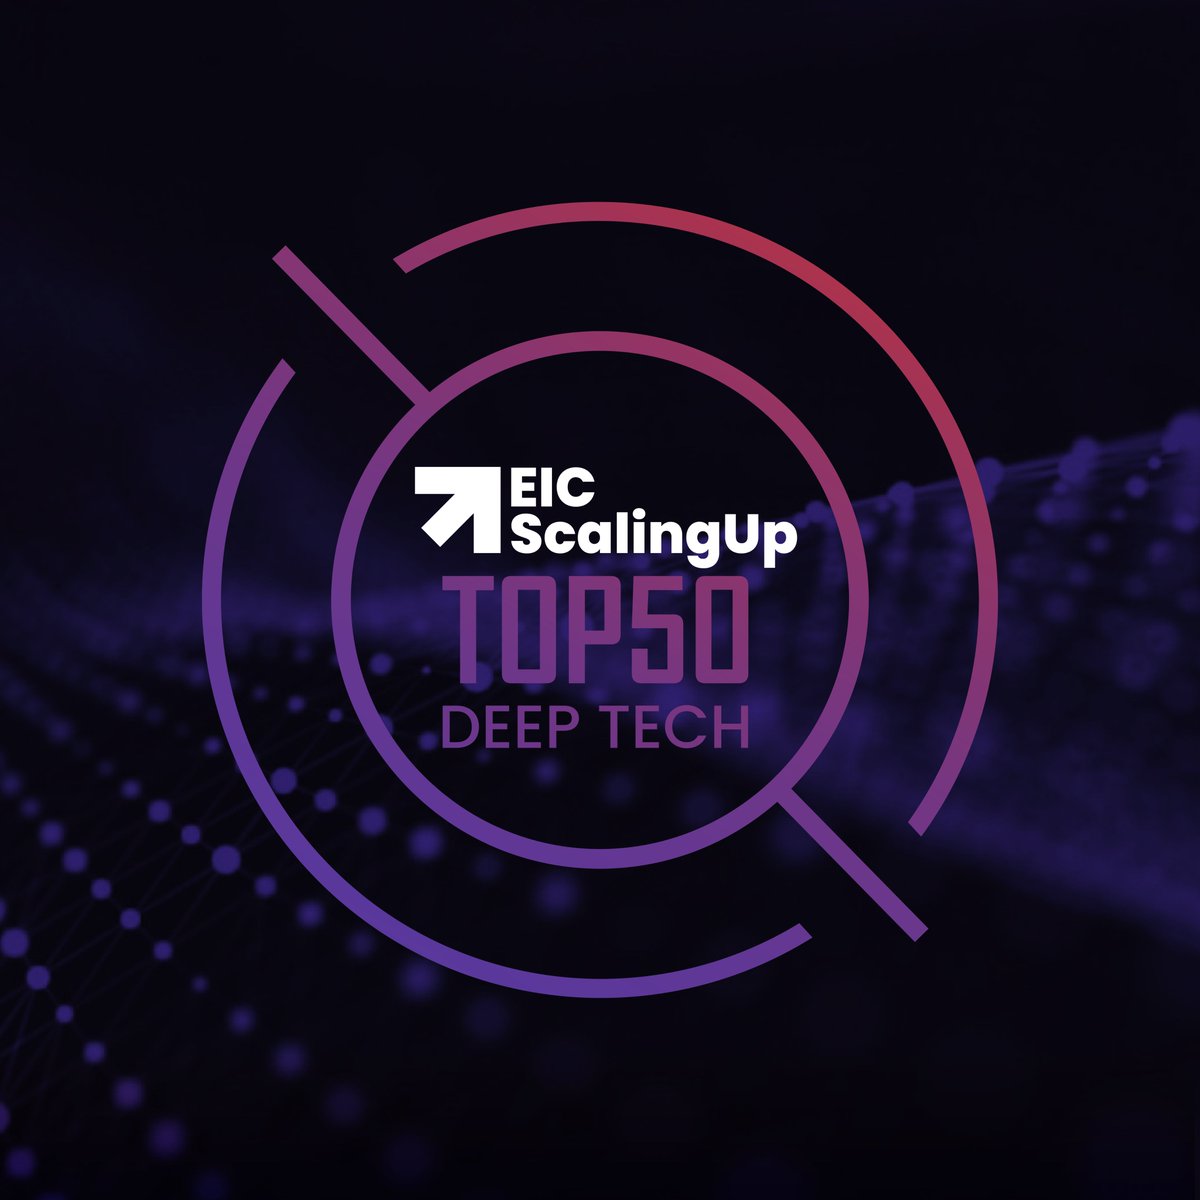 In the past 12 months, #European #deeptech companies from @EICScalingUp TOP50 list added €545 Million of new #investments. See more insights into the #investment data: infogram.com/1p2npevvykkx3k… Scaling deep tech in Europe is possible! #VentureCapital #tech